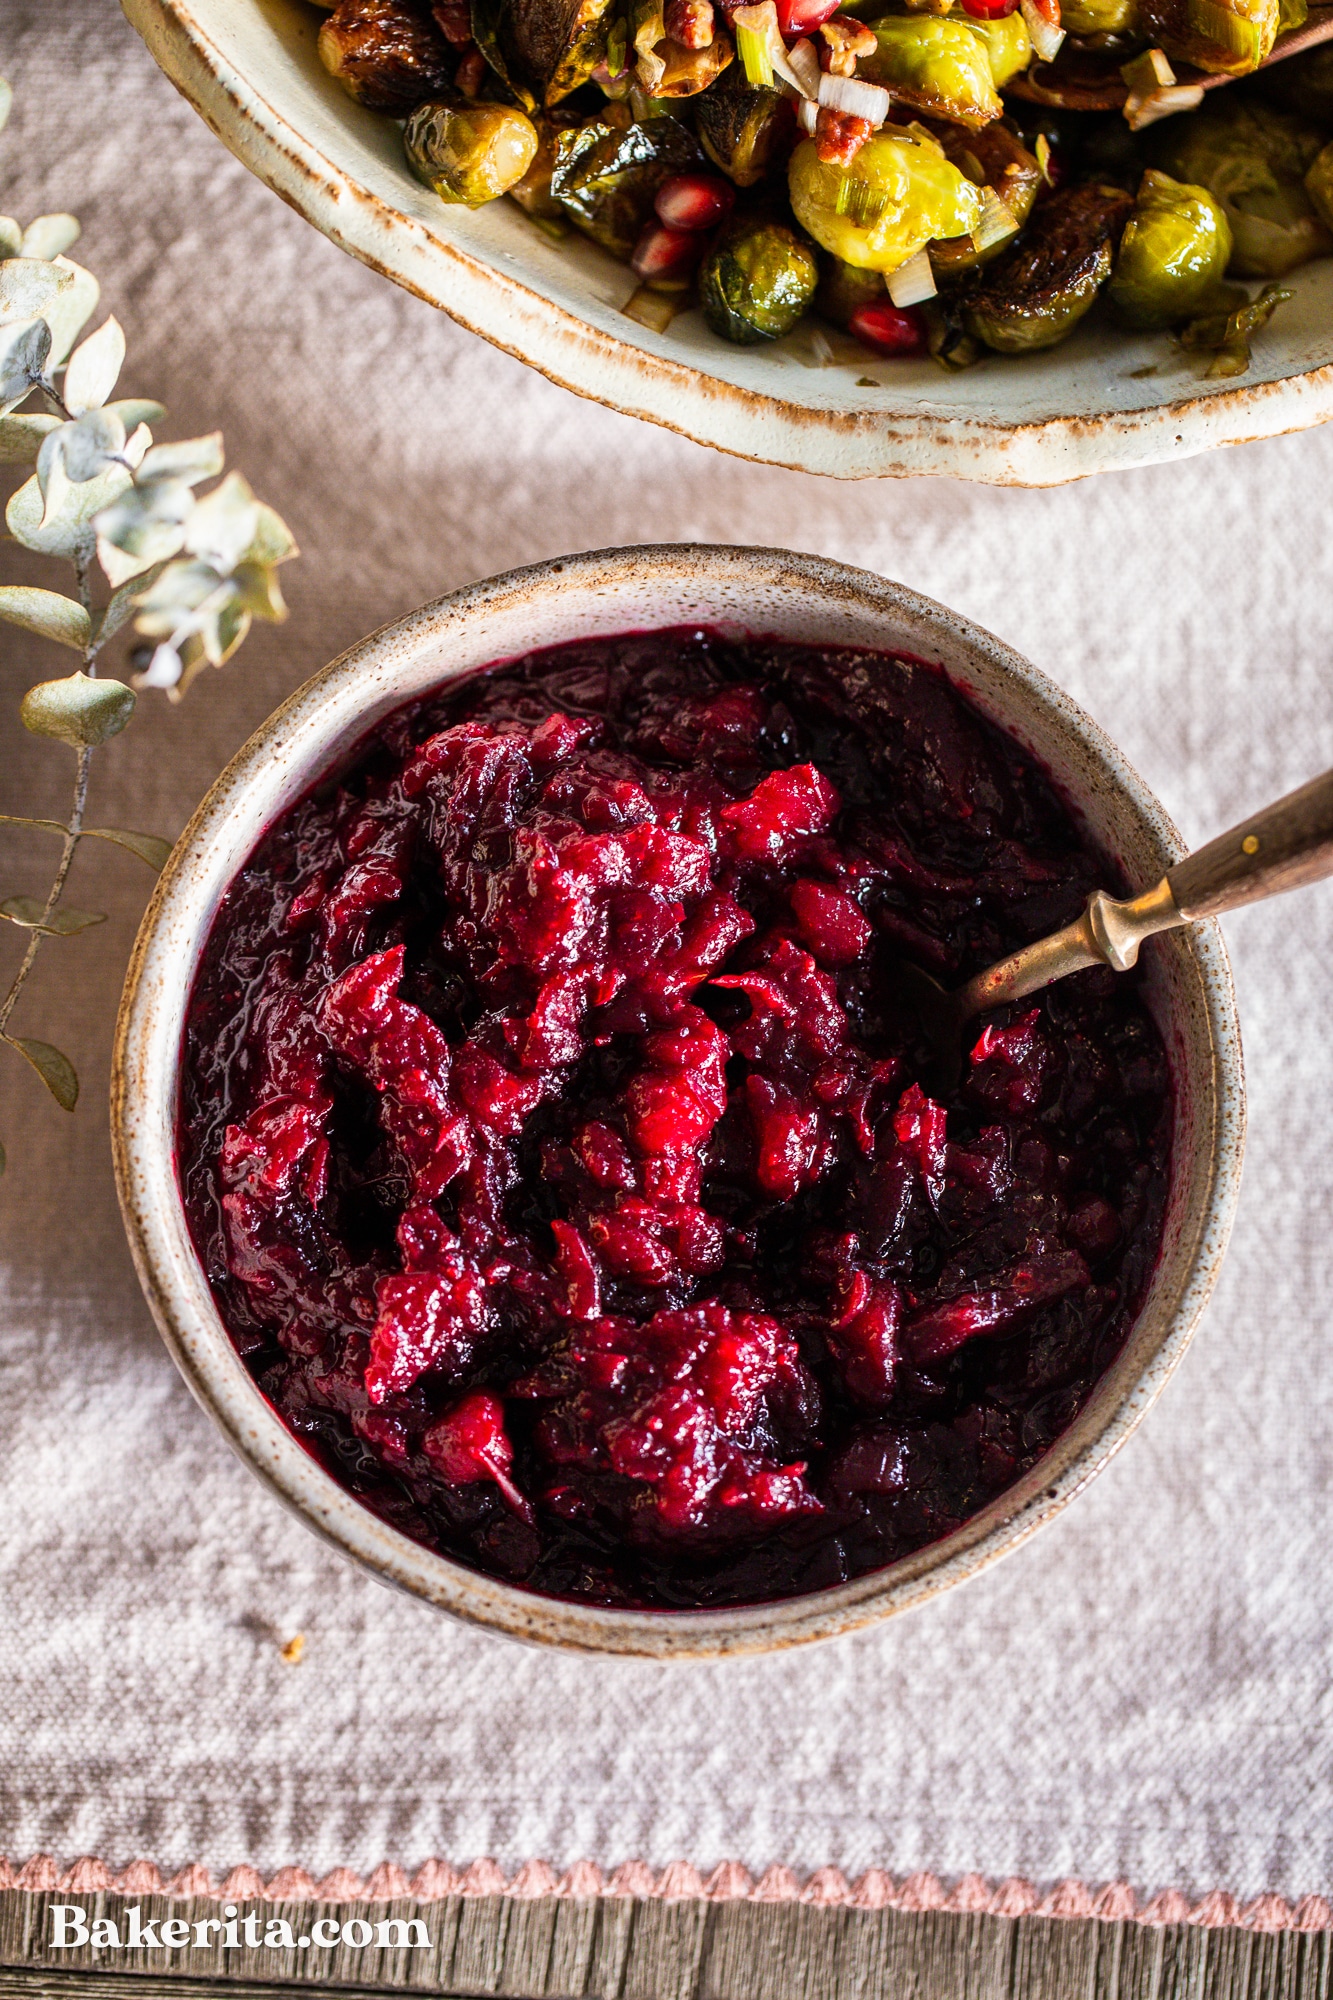 This Healthy Paleo Cranberry Sauce is simple to make, delicious, and sweetened with maple syrup to keep it refined sugar-free. Orange zest and warm spices give this cranberry sauce incredible flavor, and it's done in 15 minutes.